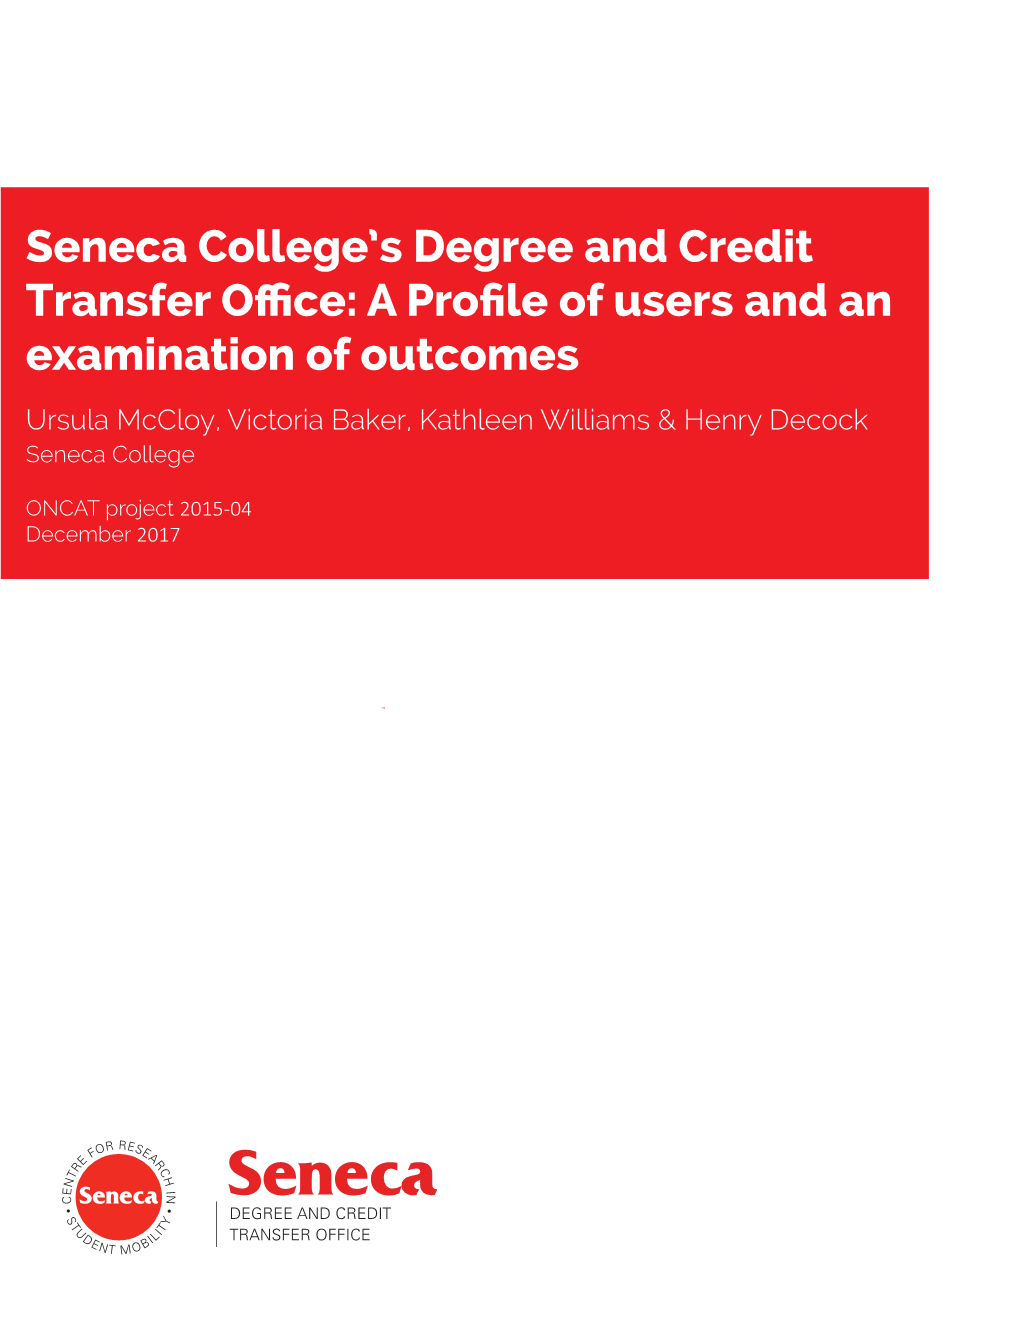 Seneca College's Degree and Credit Transfer Office: a Profile of Users and an Examination of Outcomes